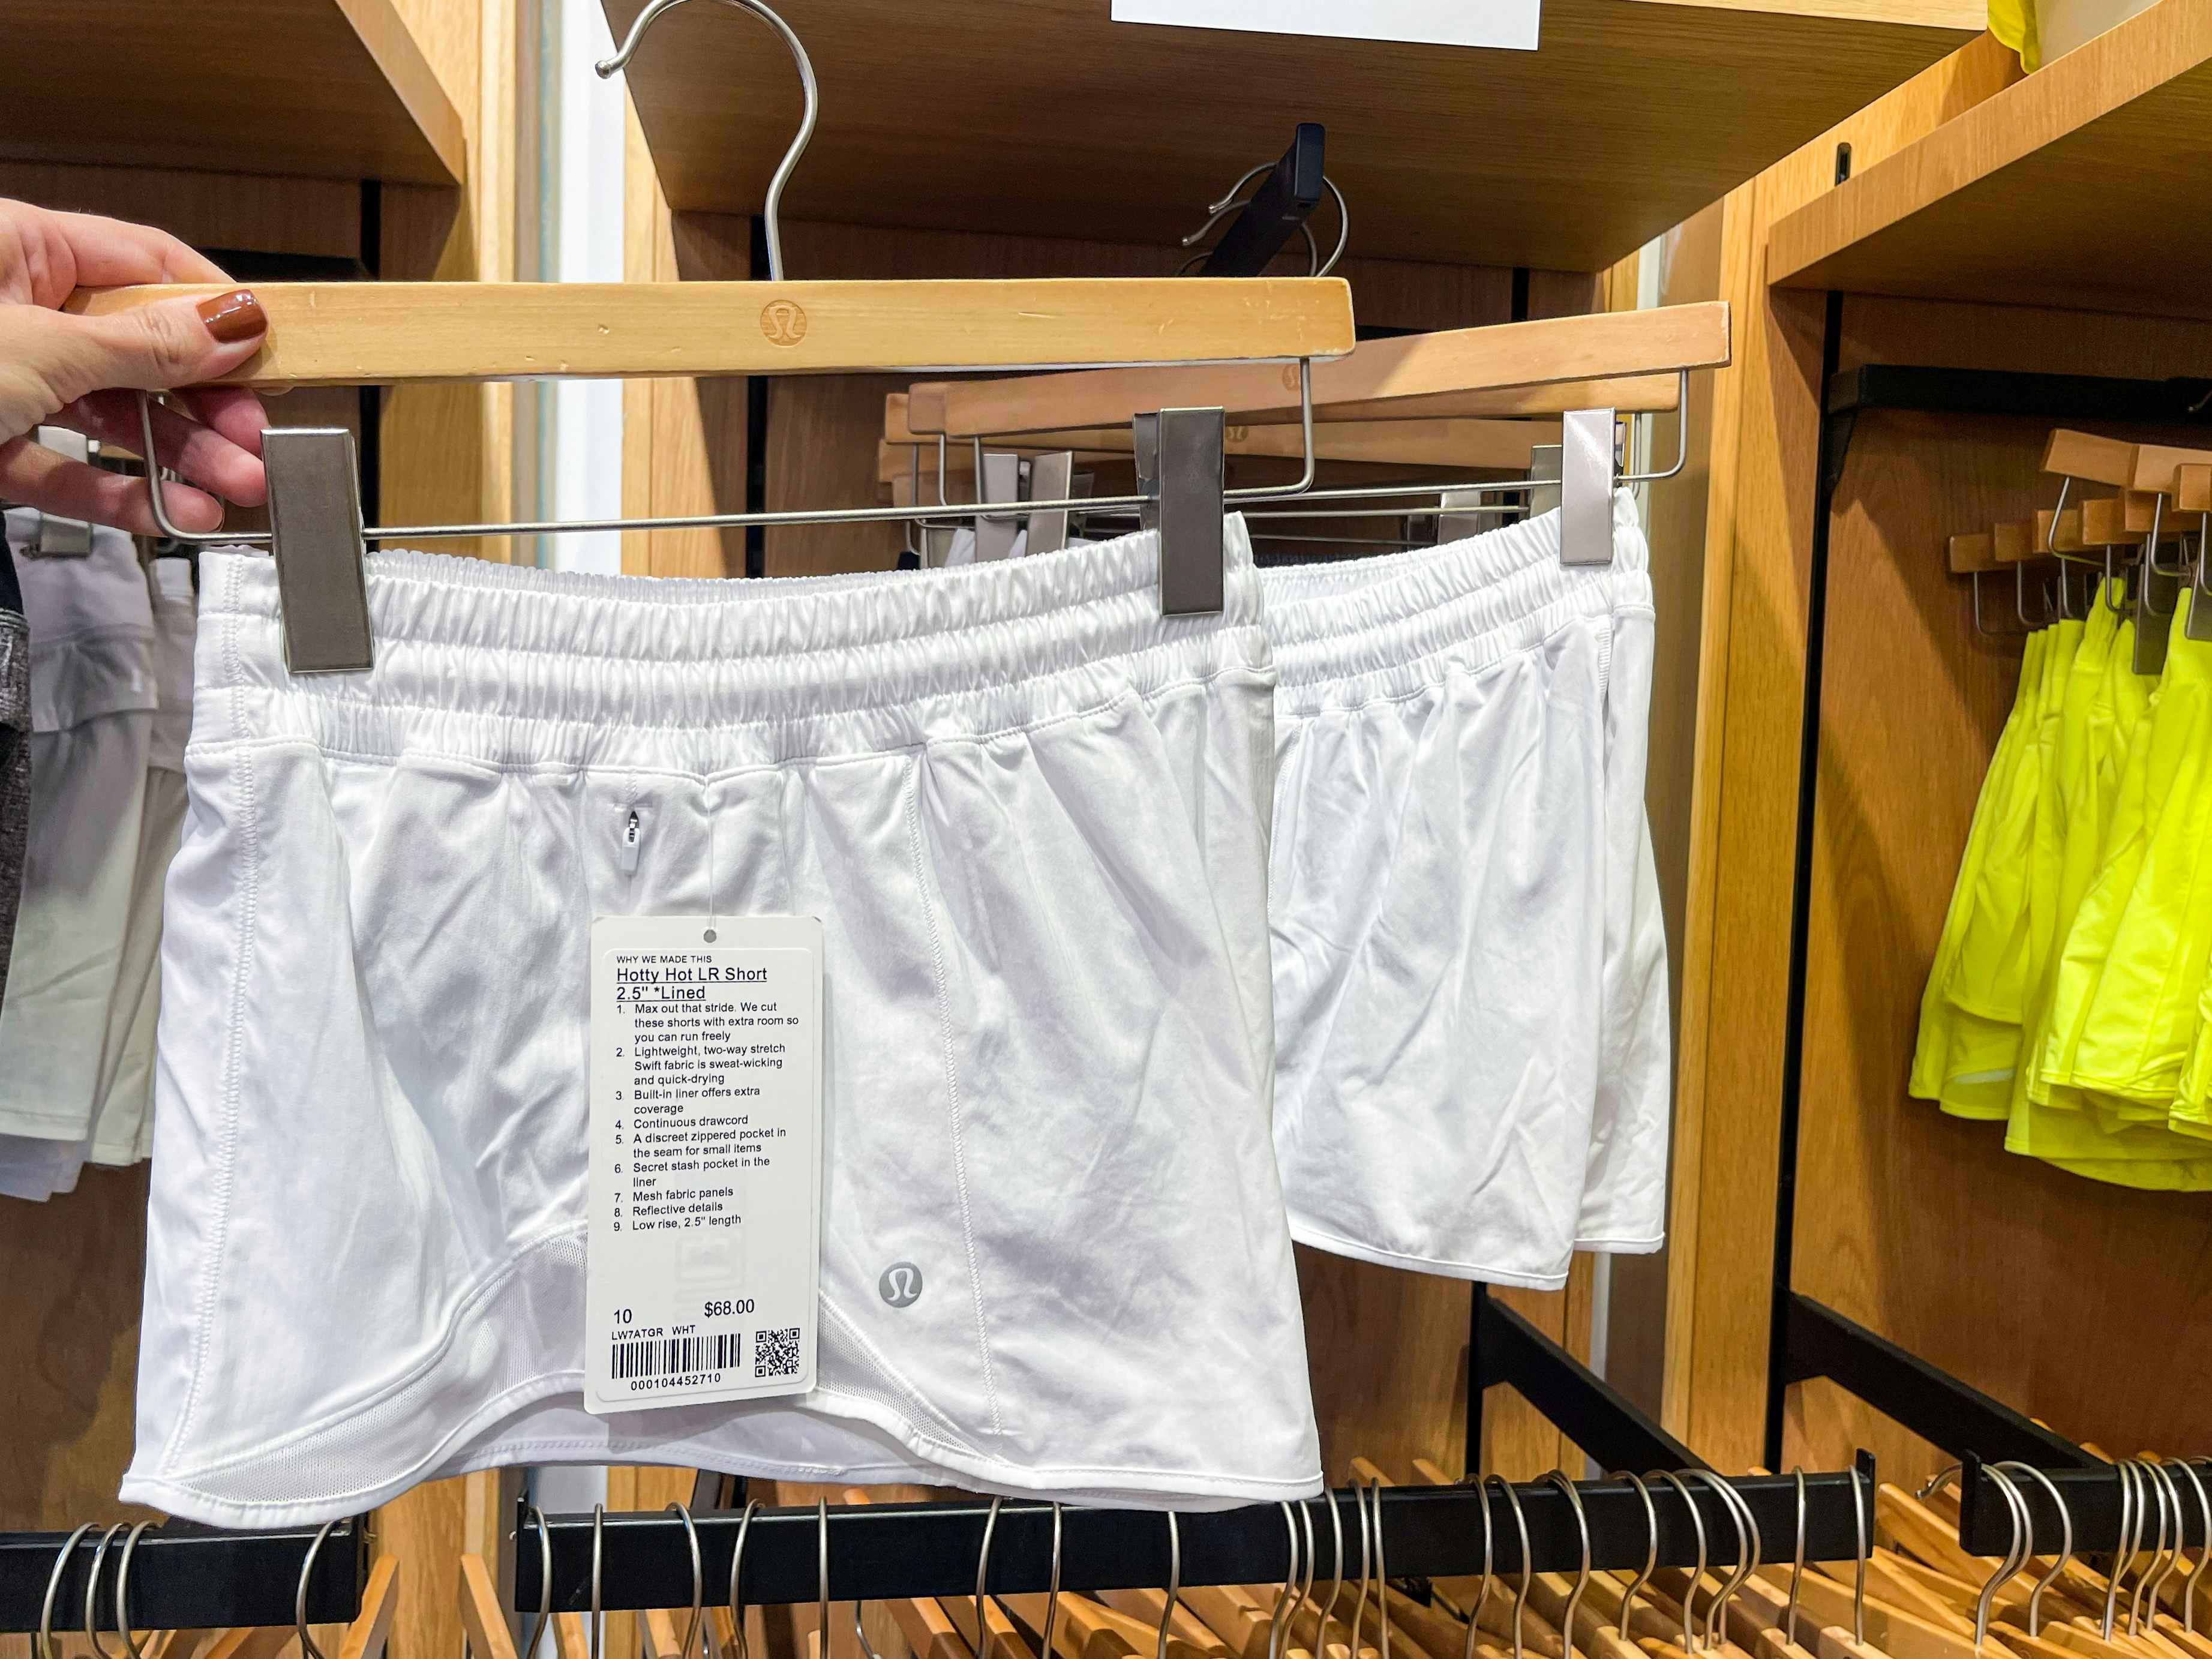 A pair of white work out shorts held out by hand in front of other shorts hanging on the store rack.